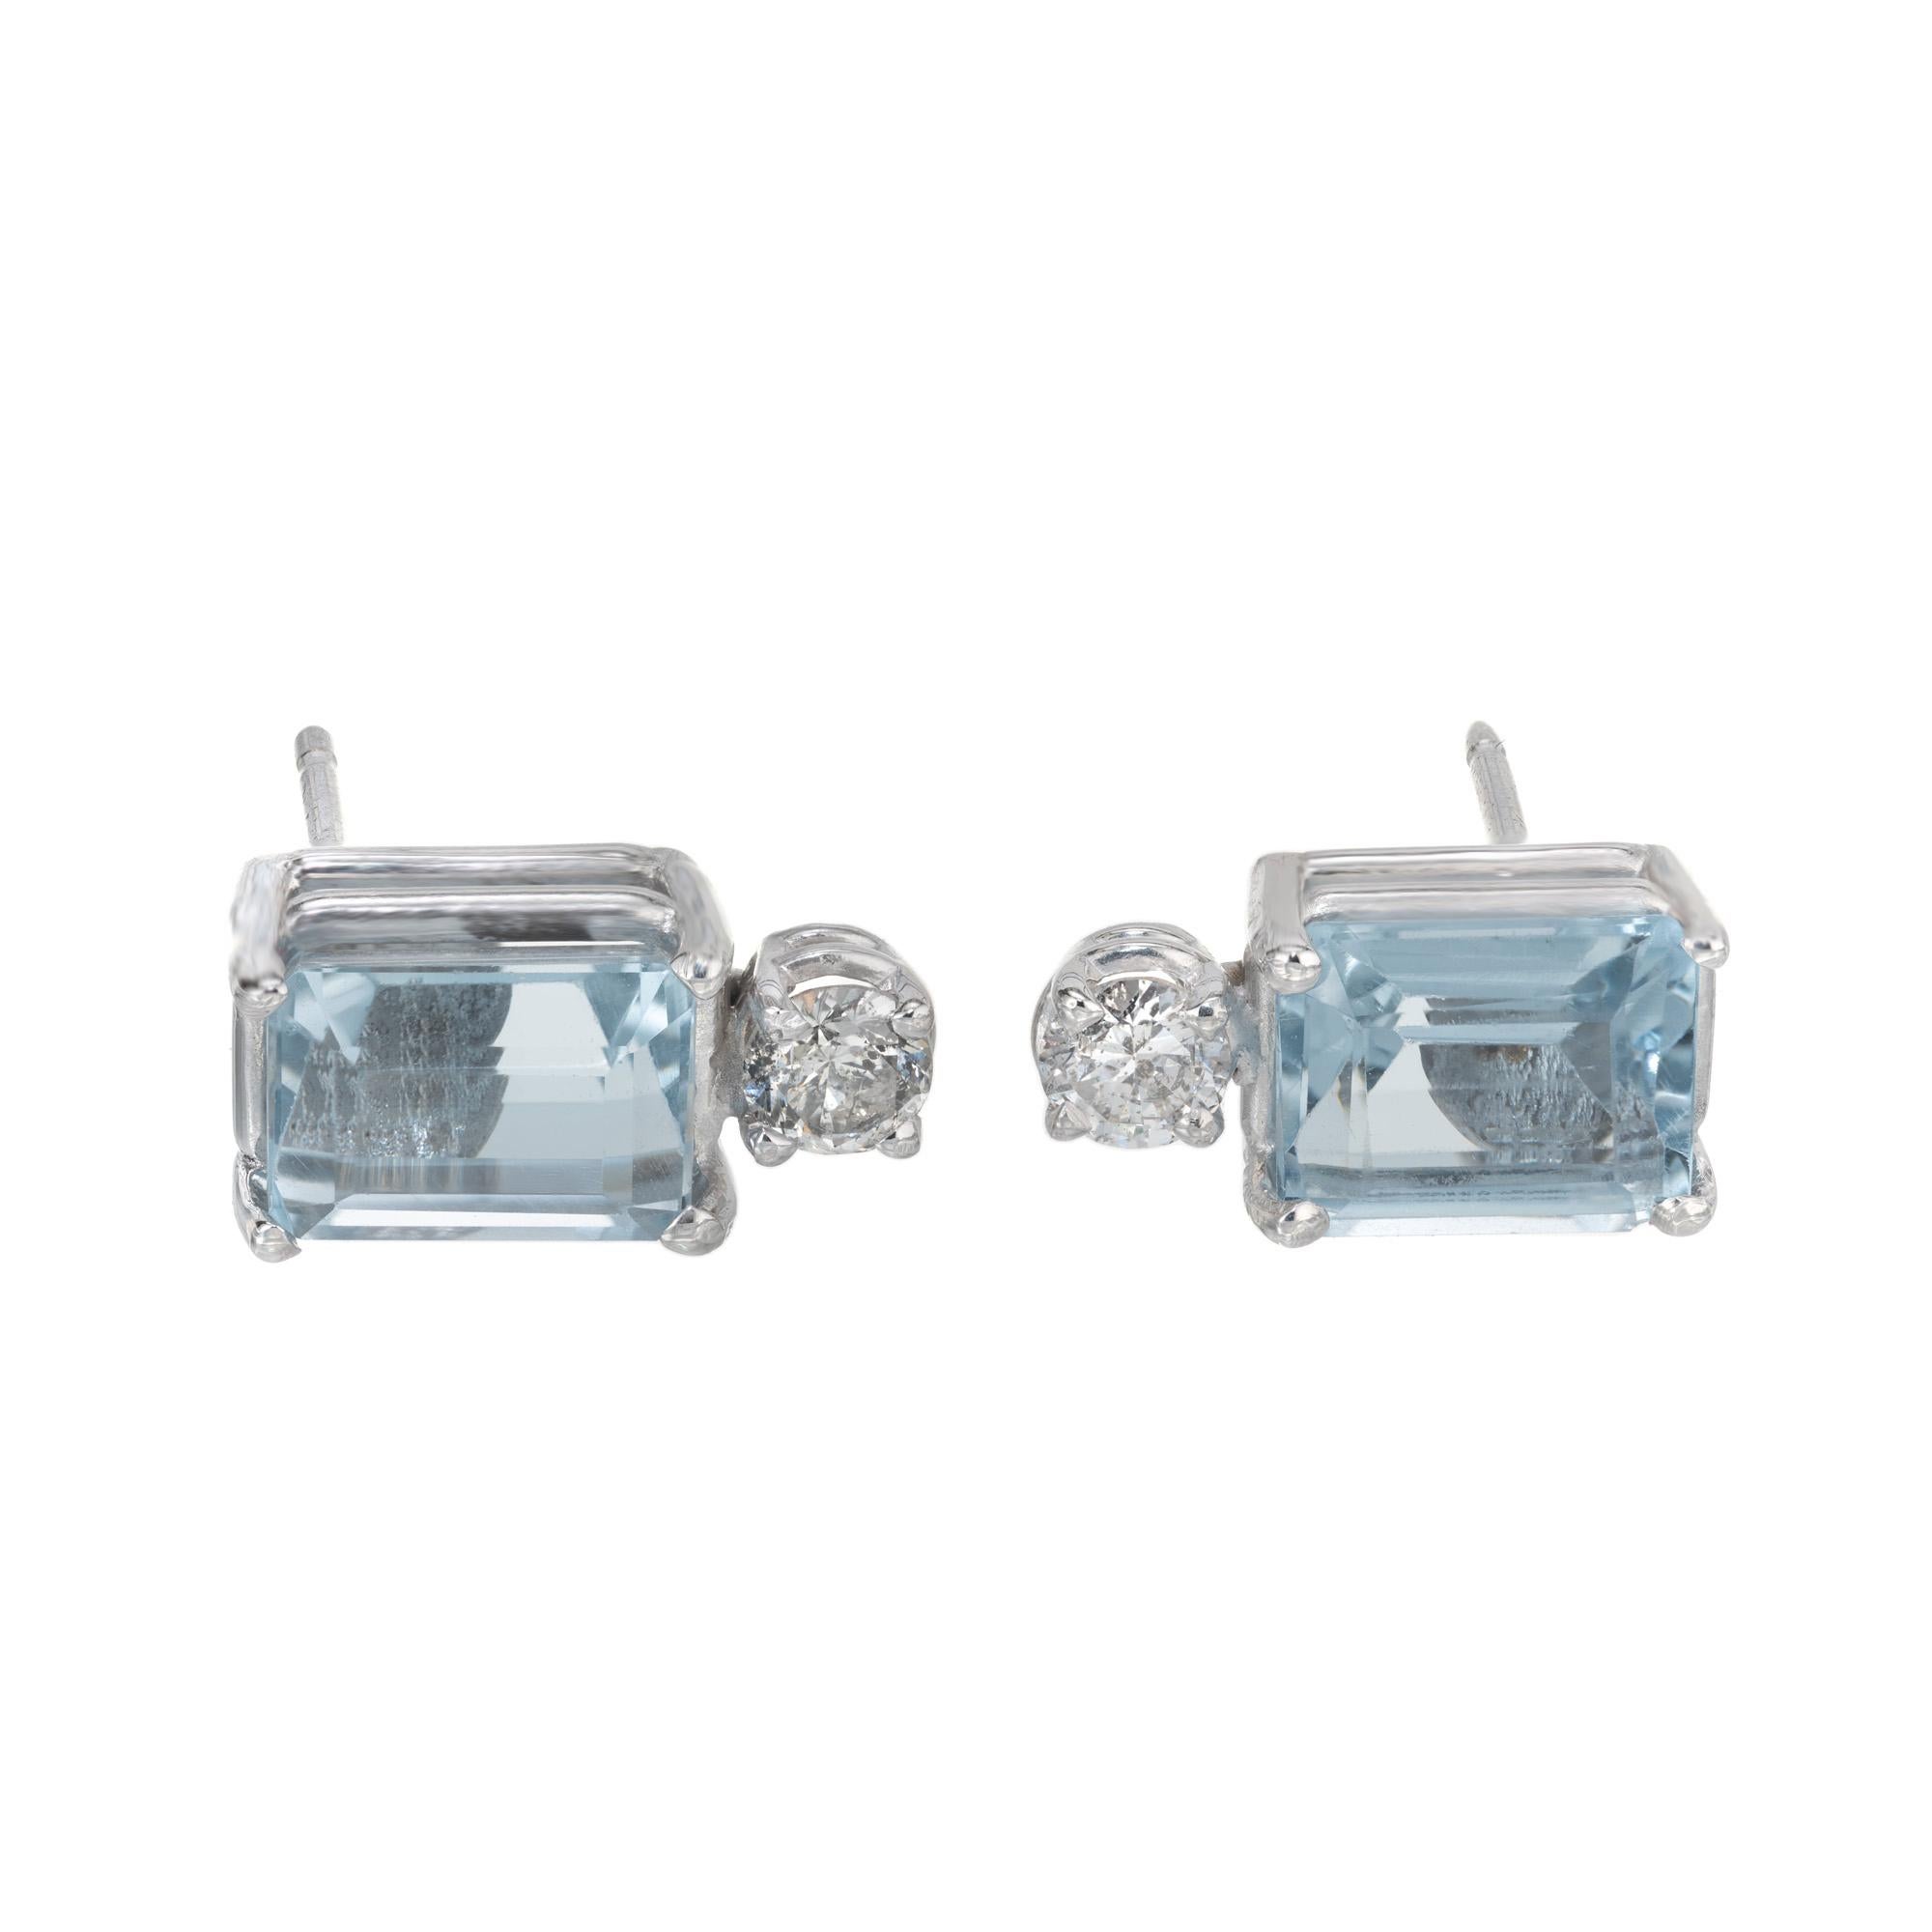 Aqua and diamond earrings. 2 Emerald cut rich aquamarines set in 14k white gold 4 prong settings. Each aqua is accented with 2 round brilliant cut diamonds. Designed and crafted in the Peter Suchy Workshop.

2 emerald cut blue aquamarines, approx.